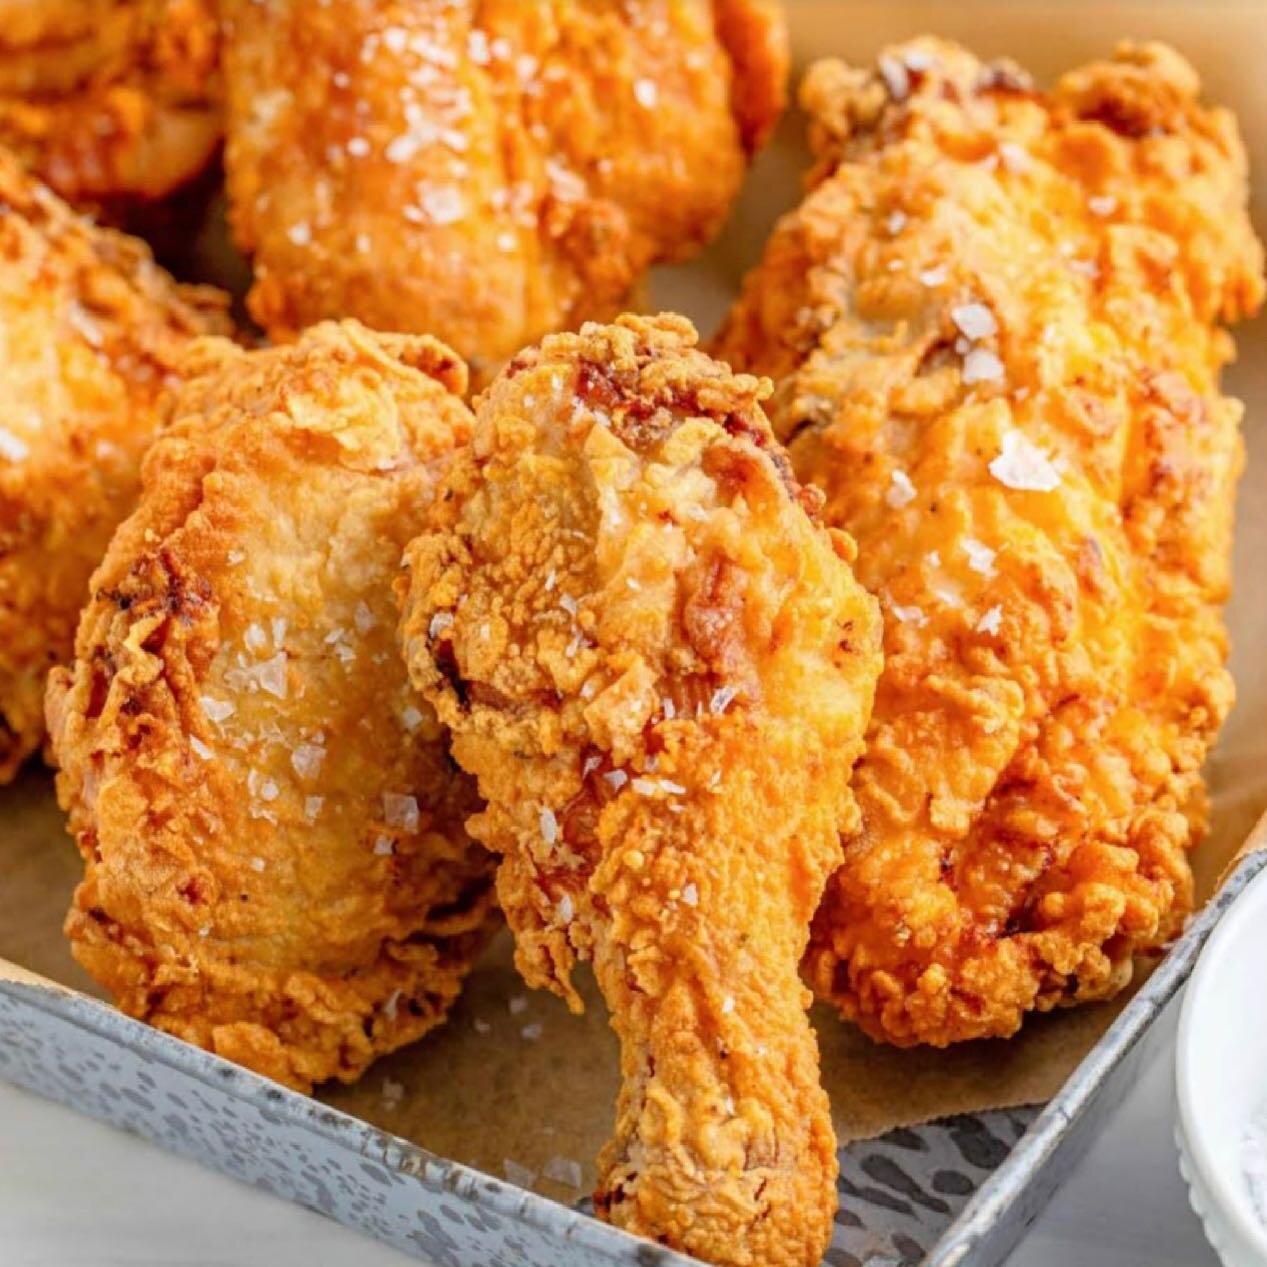 We&rsquo;ve bonded over a lot of things over the years and our love of chicken is one of them. From korean fried chicken to bbq wings we love it all. Tuesday, July 6th won&rsquo;t be #TacoTuesday but it will be #NationalFriedChickenDay! Tag your favo